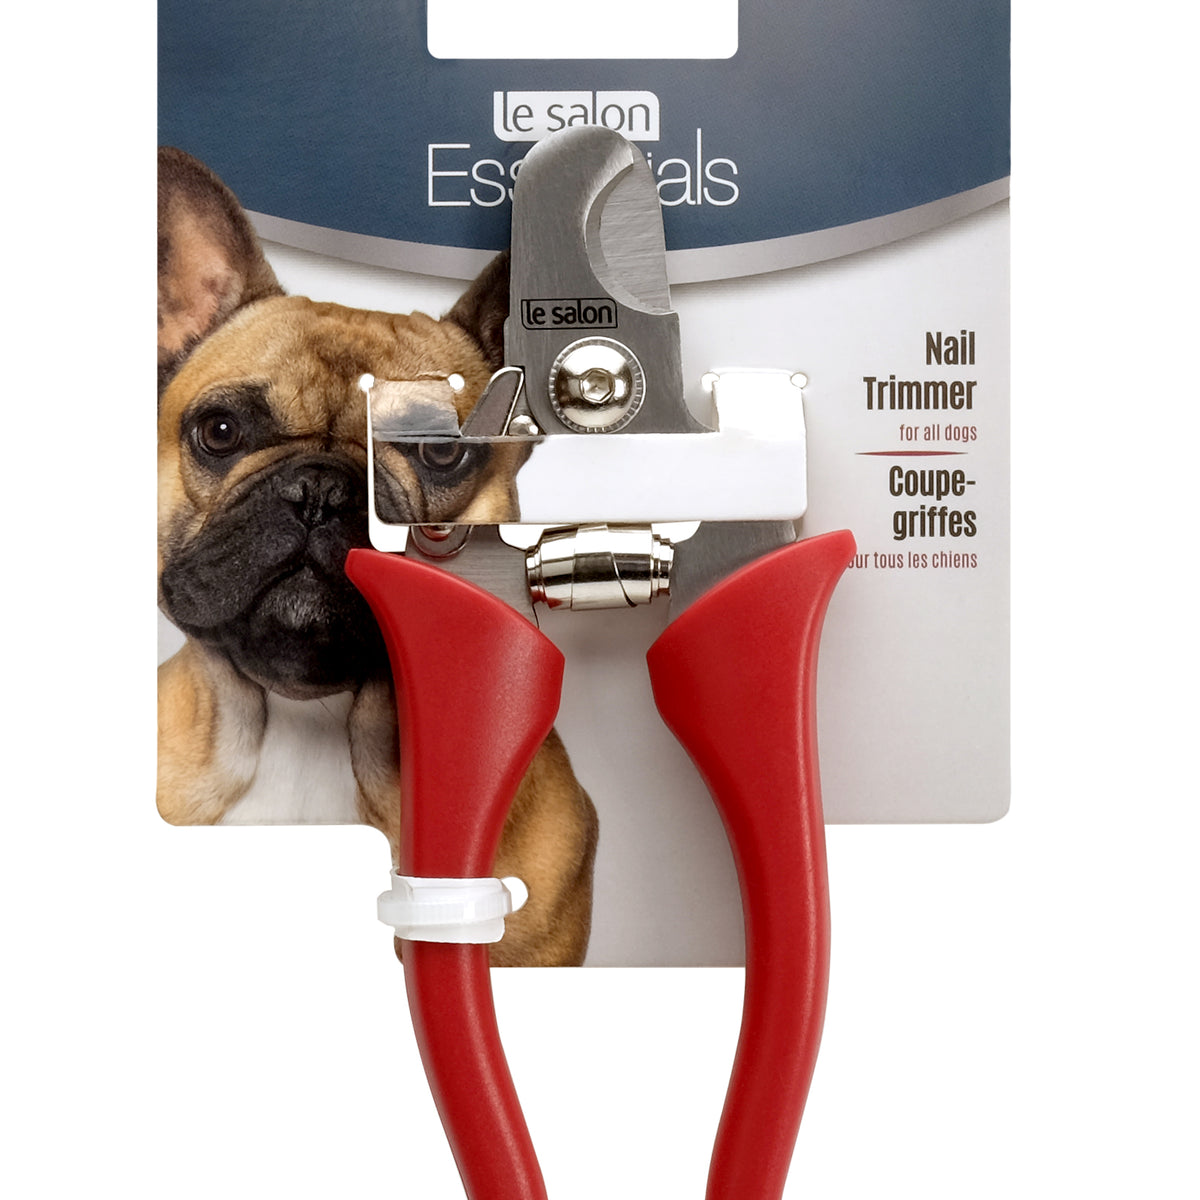 Best dog nail clippers for trimming, grinding or filing dogs' claws